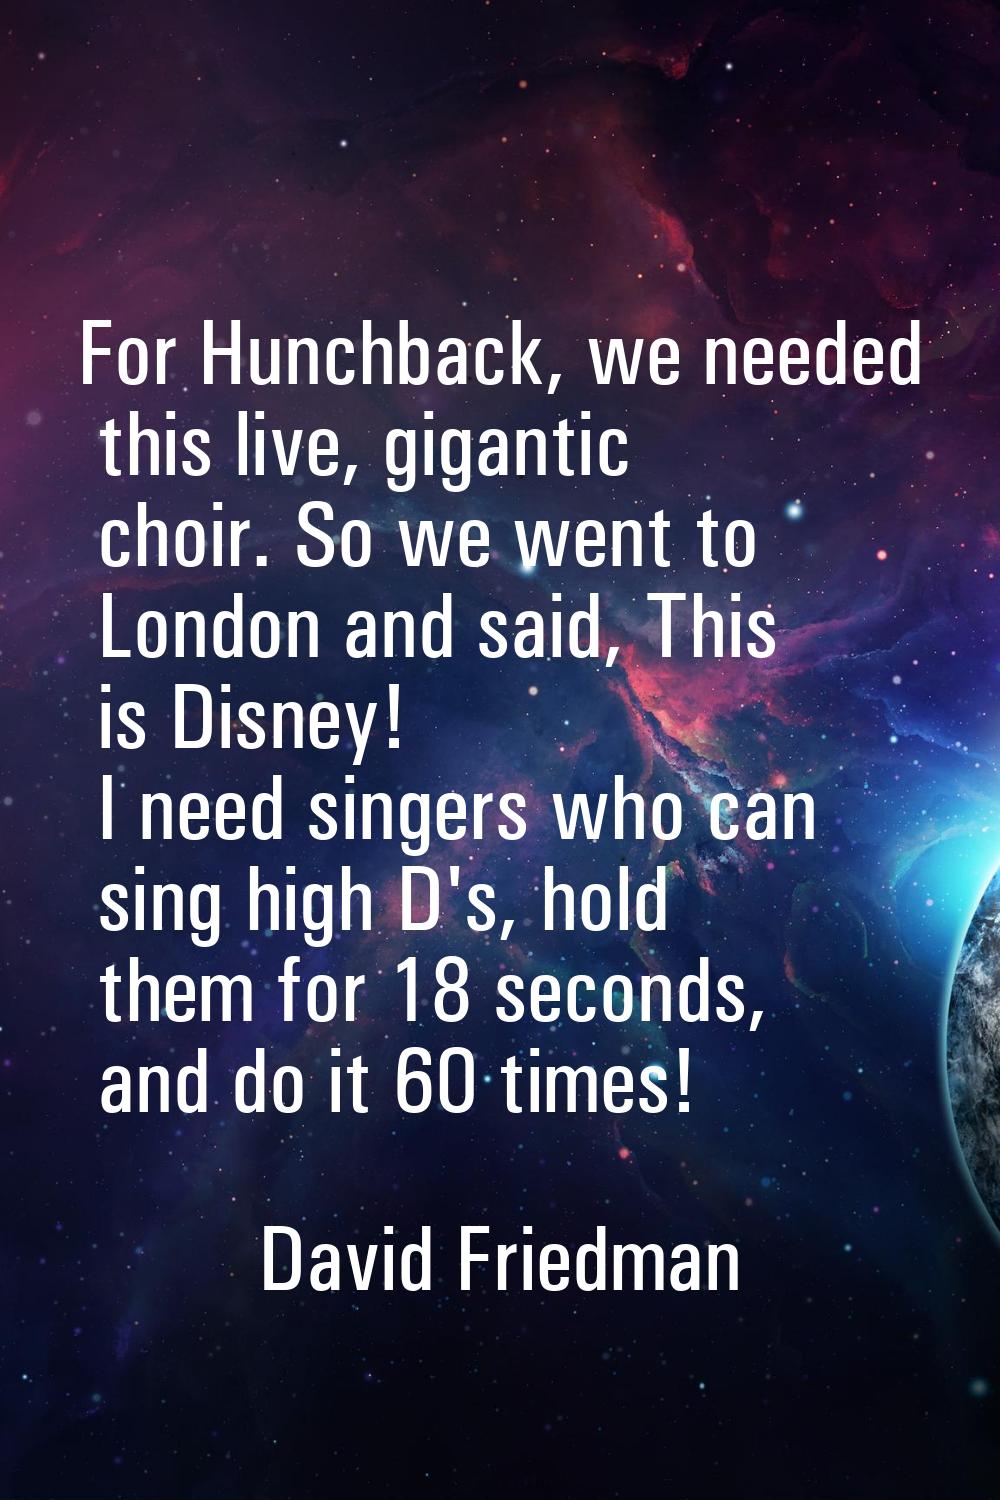 For Hunchback, we needed this live, gigantic choir. So we went to London and said, This is Disney! 